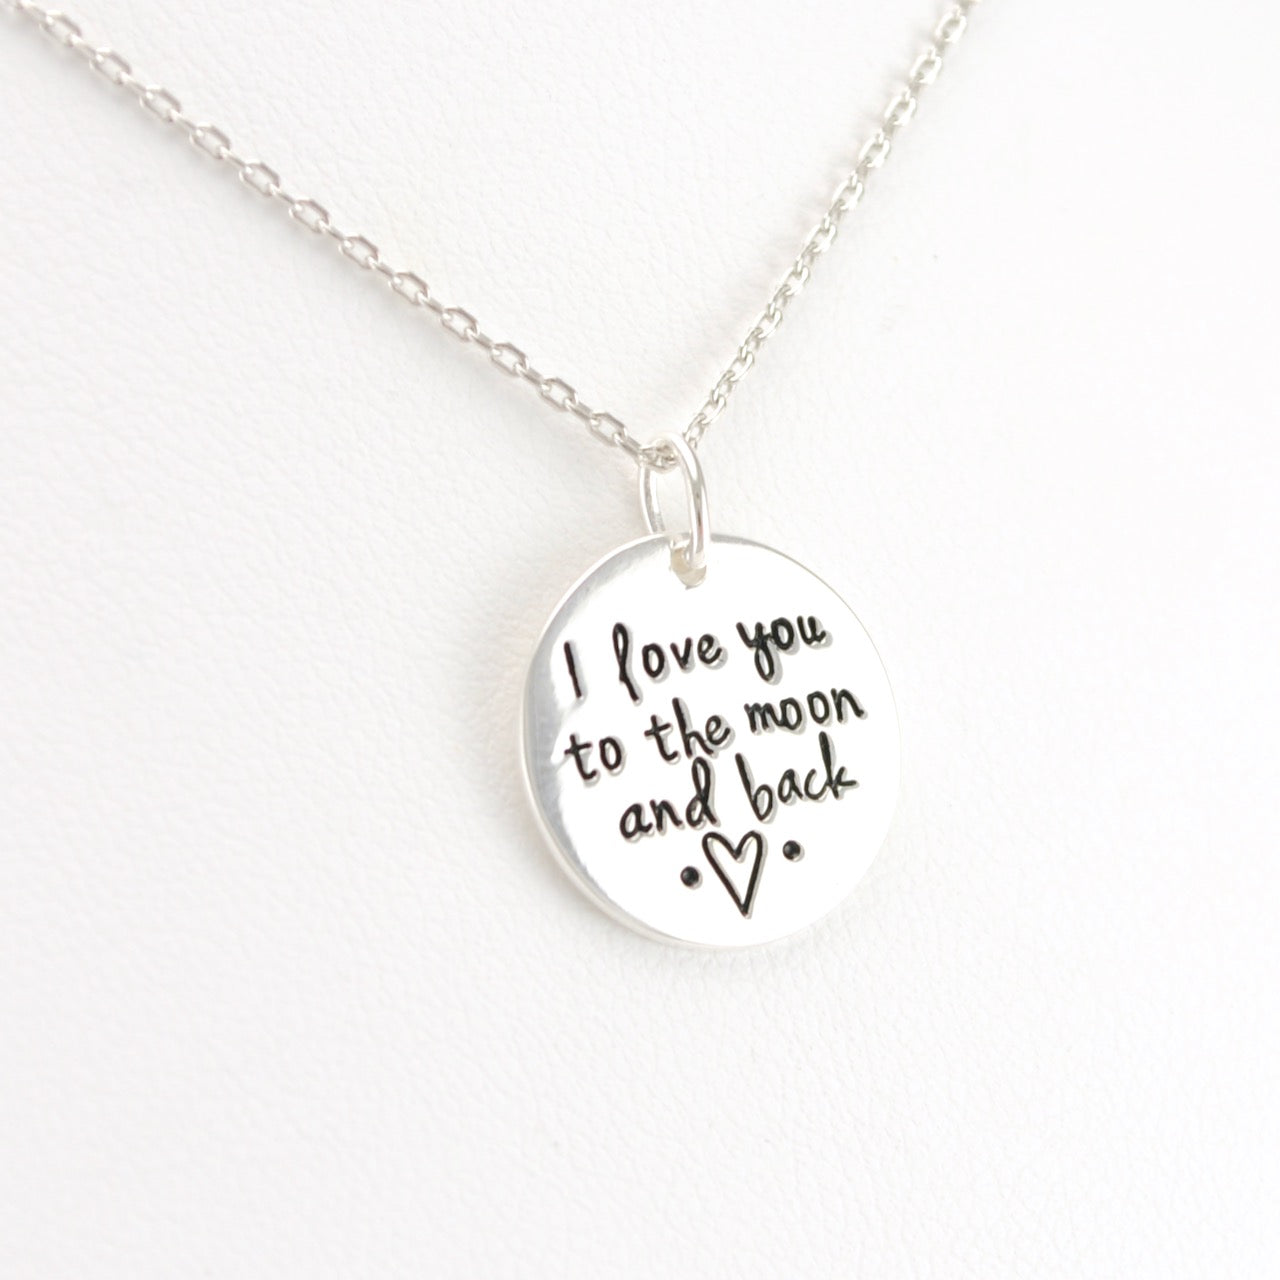 Silver Love You to the Moon Necklace